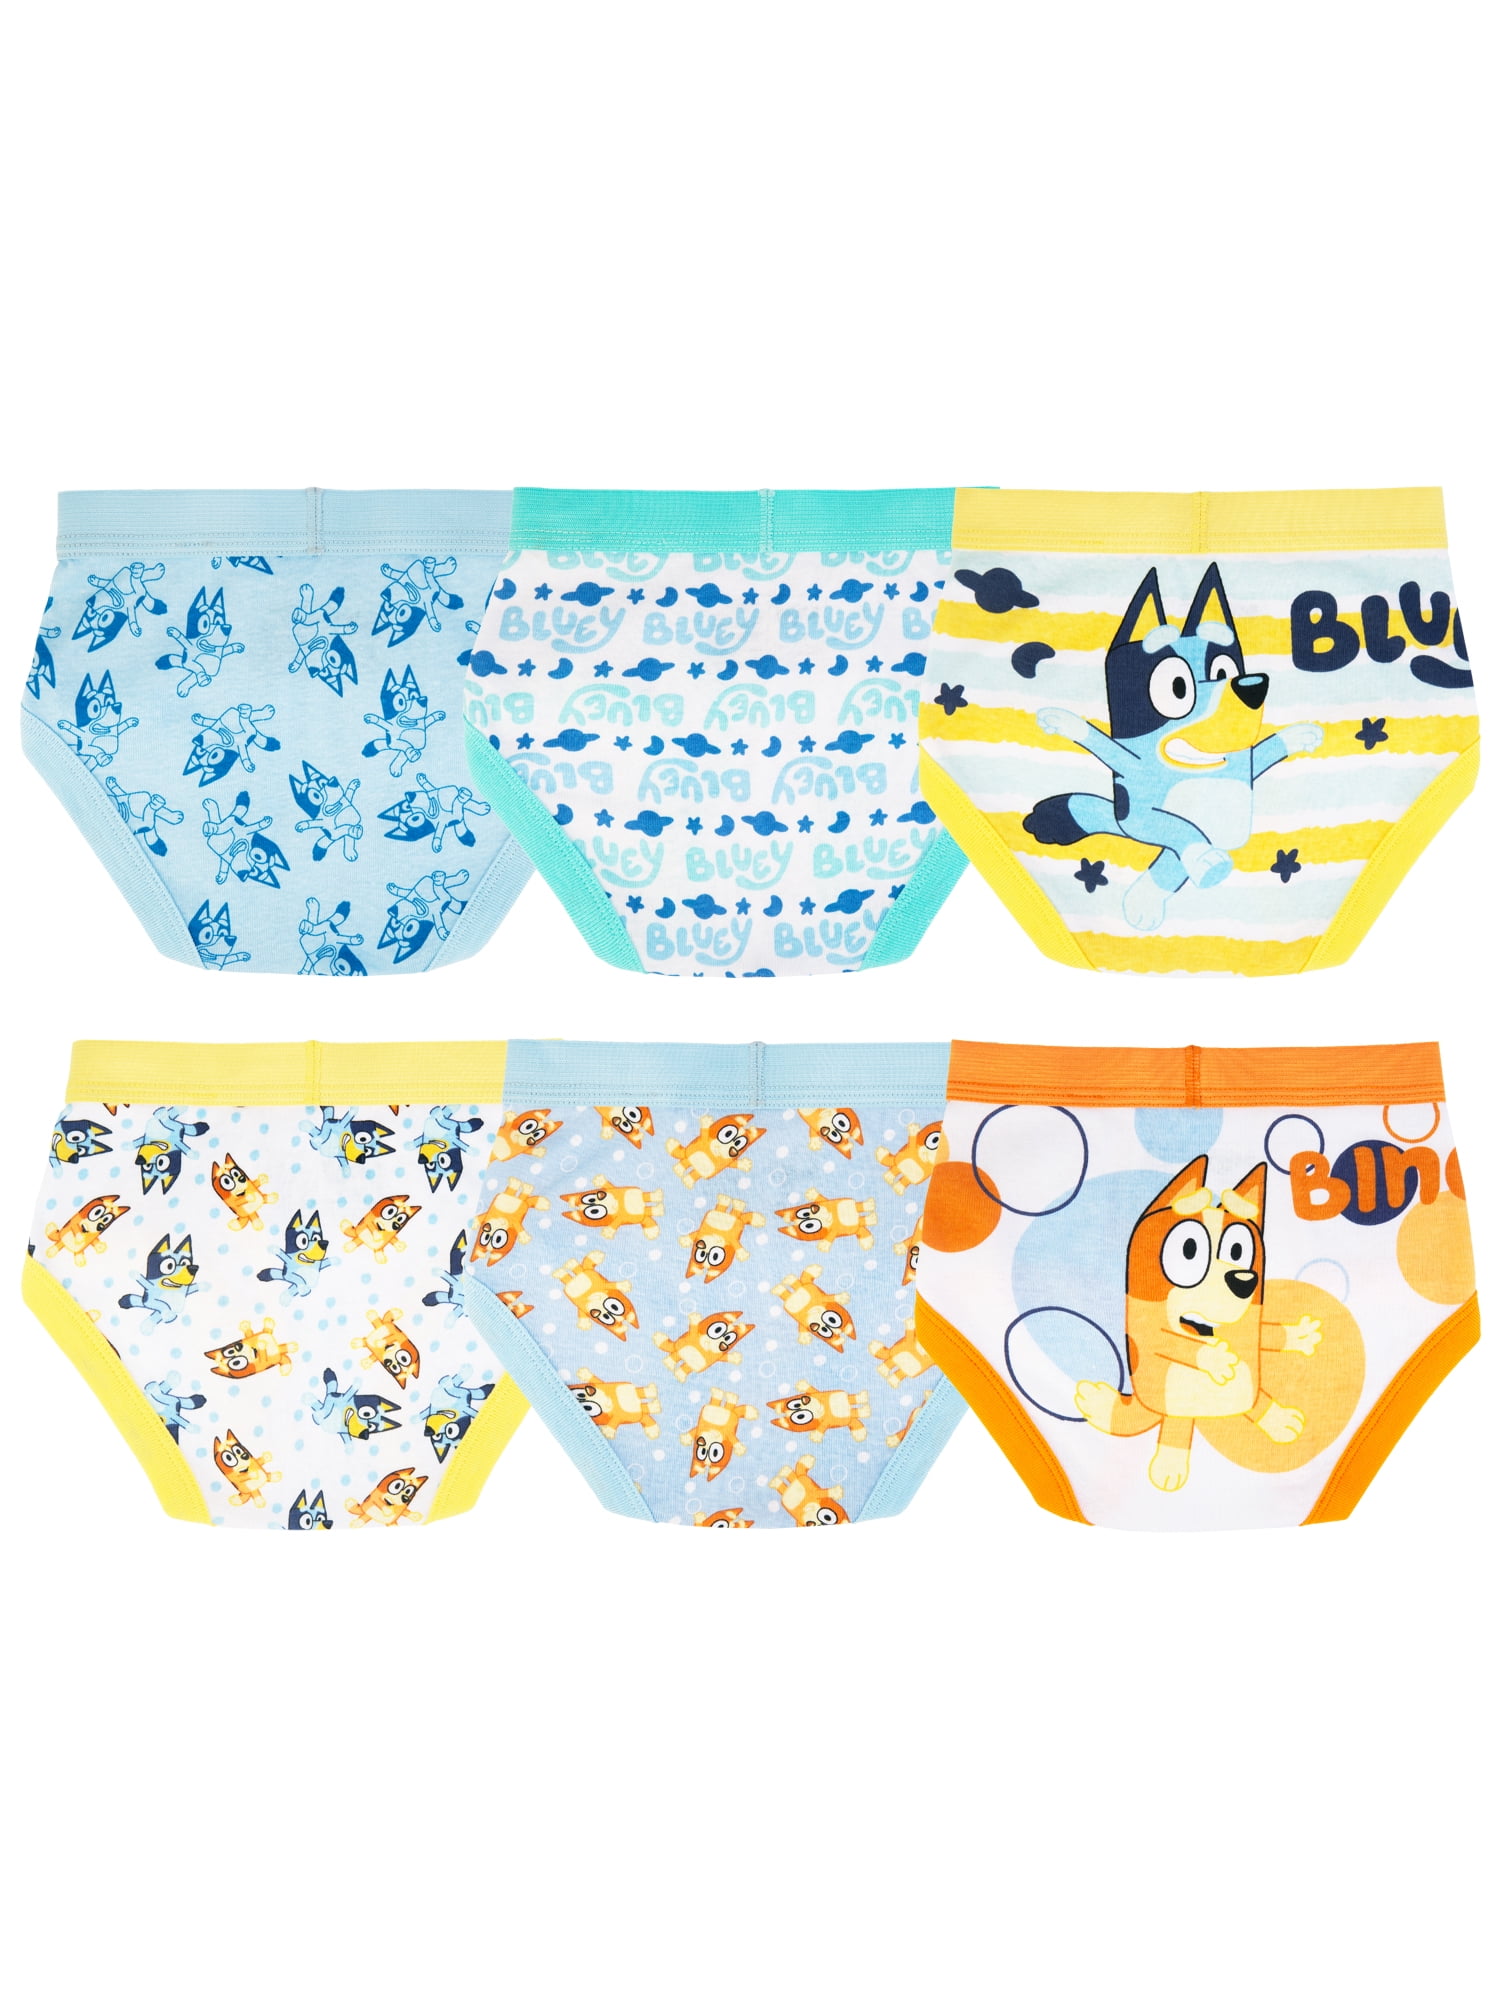 Bluey 6 Pack Size 2T/3T Cotton Briefs New In Package. Softer Than Ever.